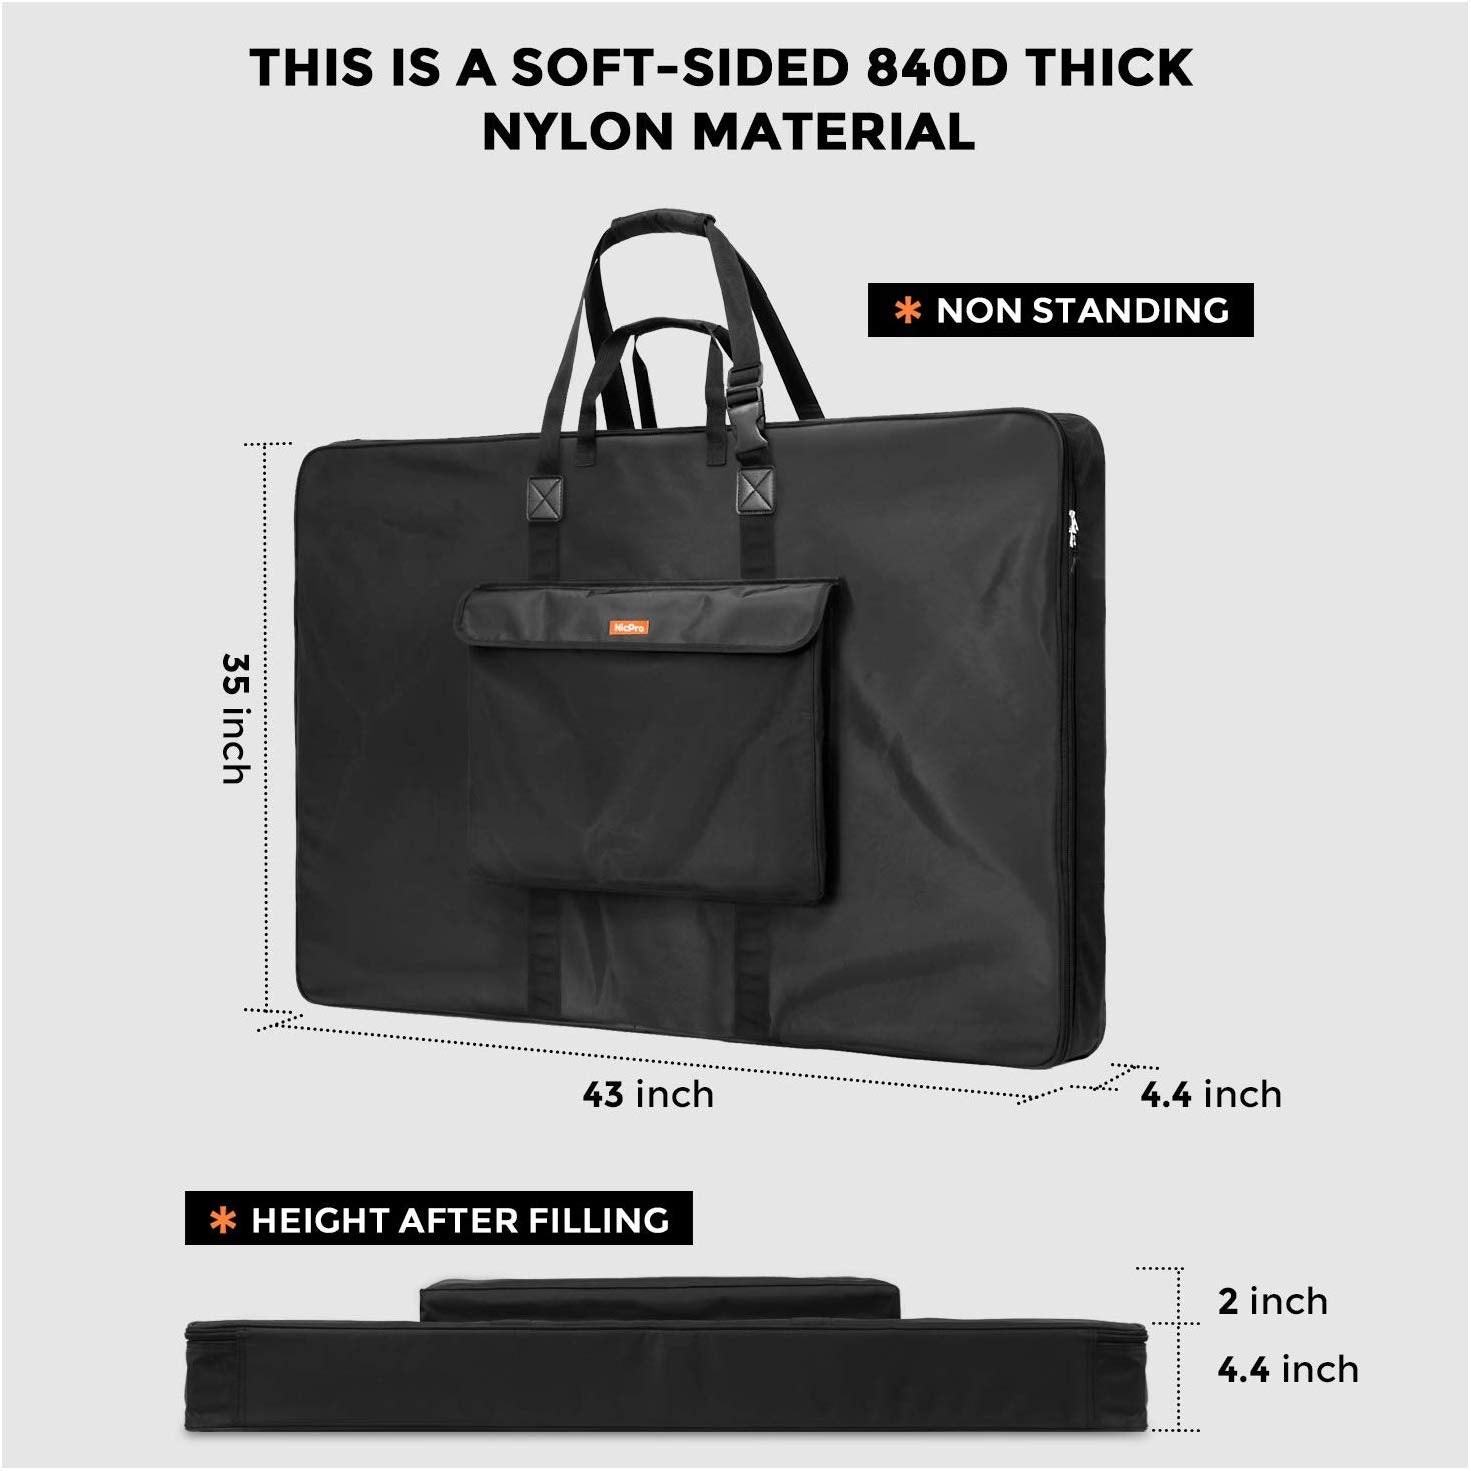 Nicpro Art Portfolio Bag 24 x 36 Inches Waterproof Artist Carrying Bag Soft Sided with Strap,Storage for Artwork Sketch Drawing Photography